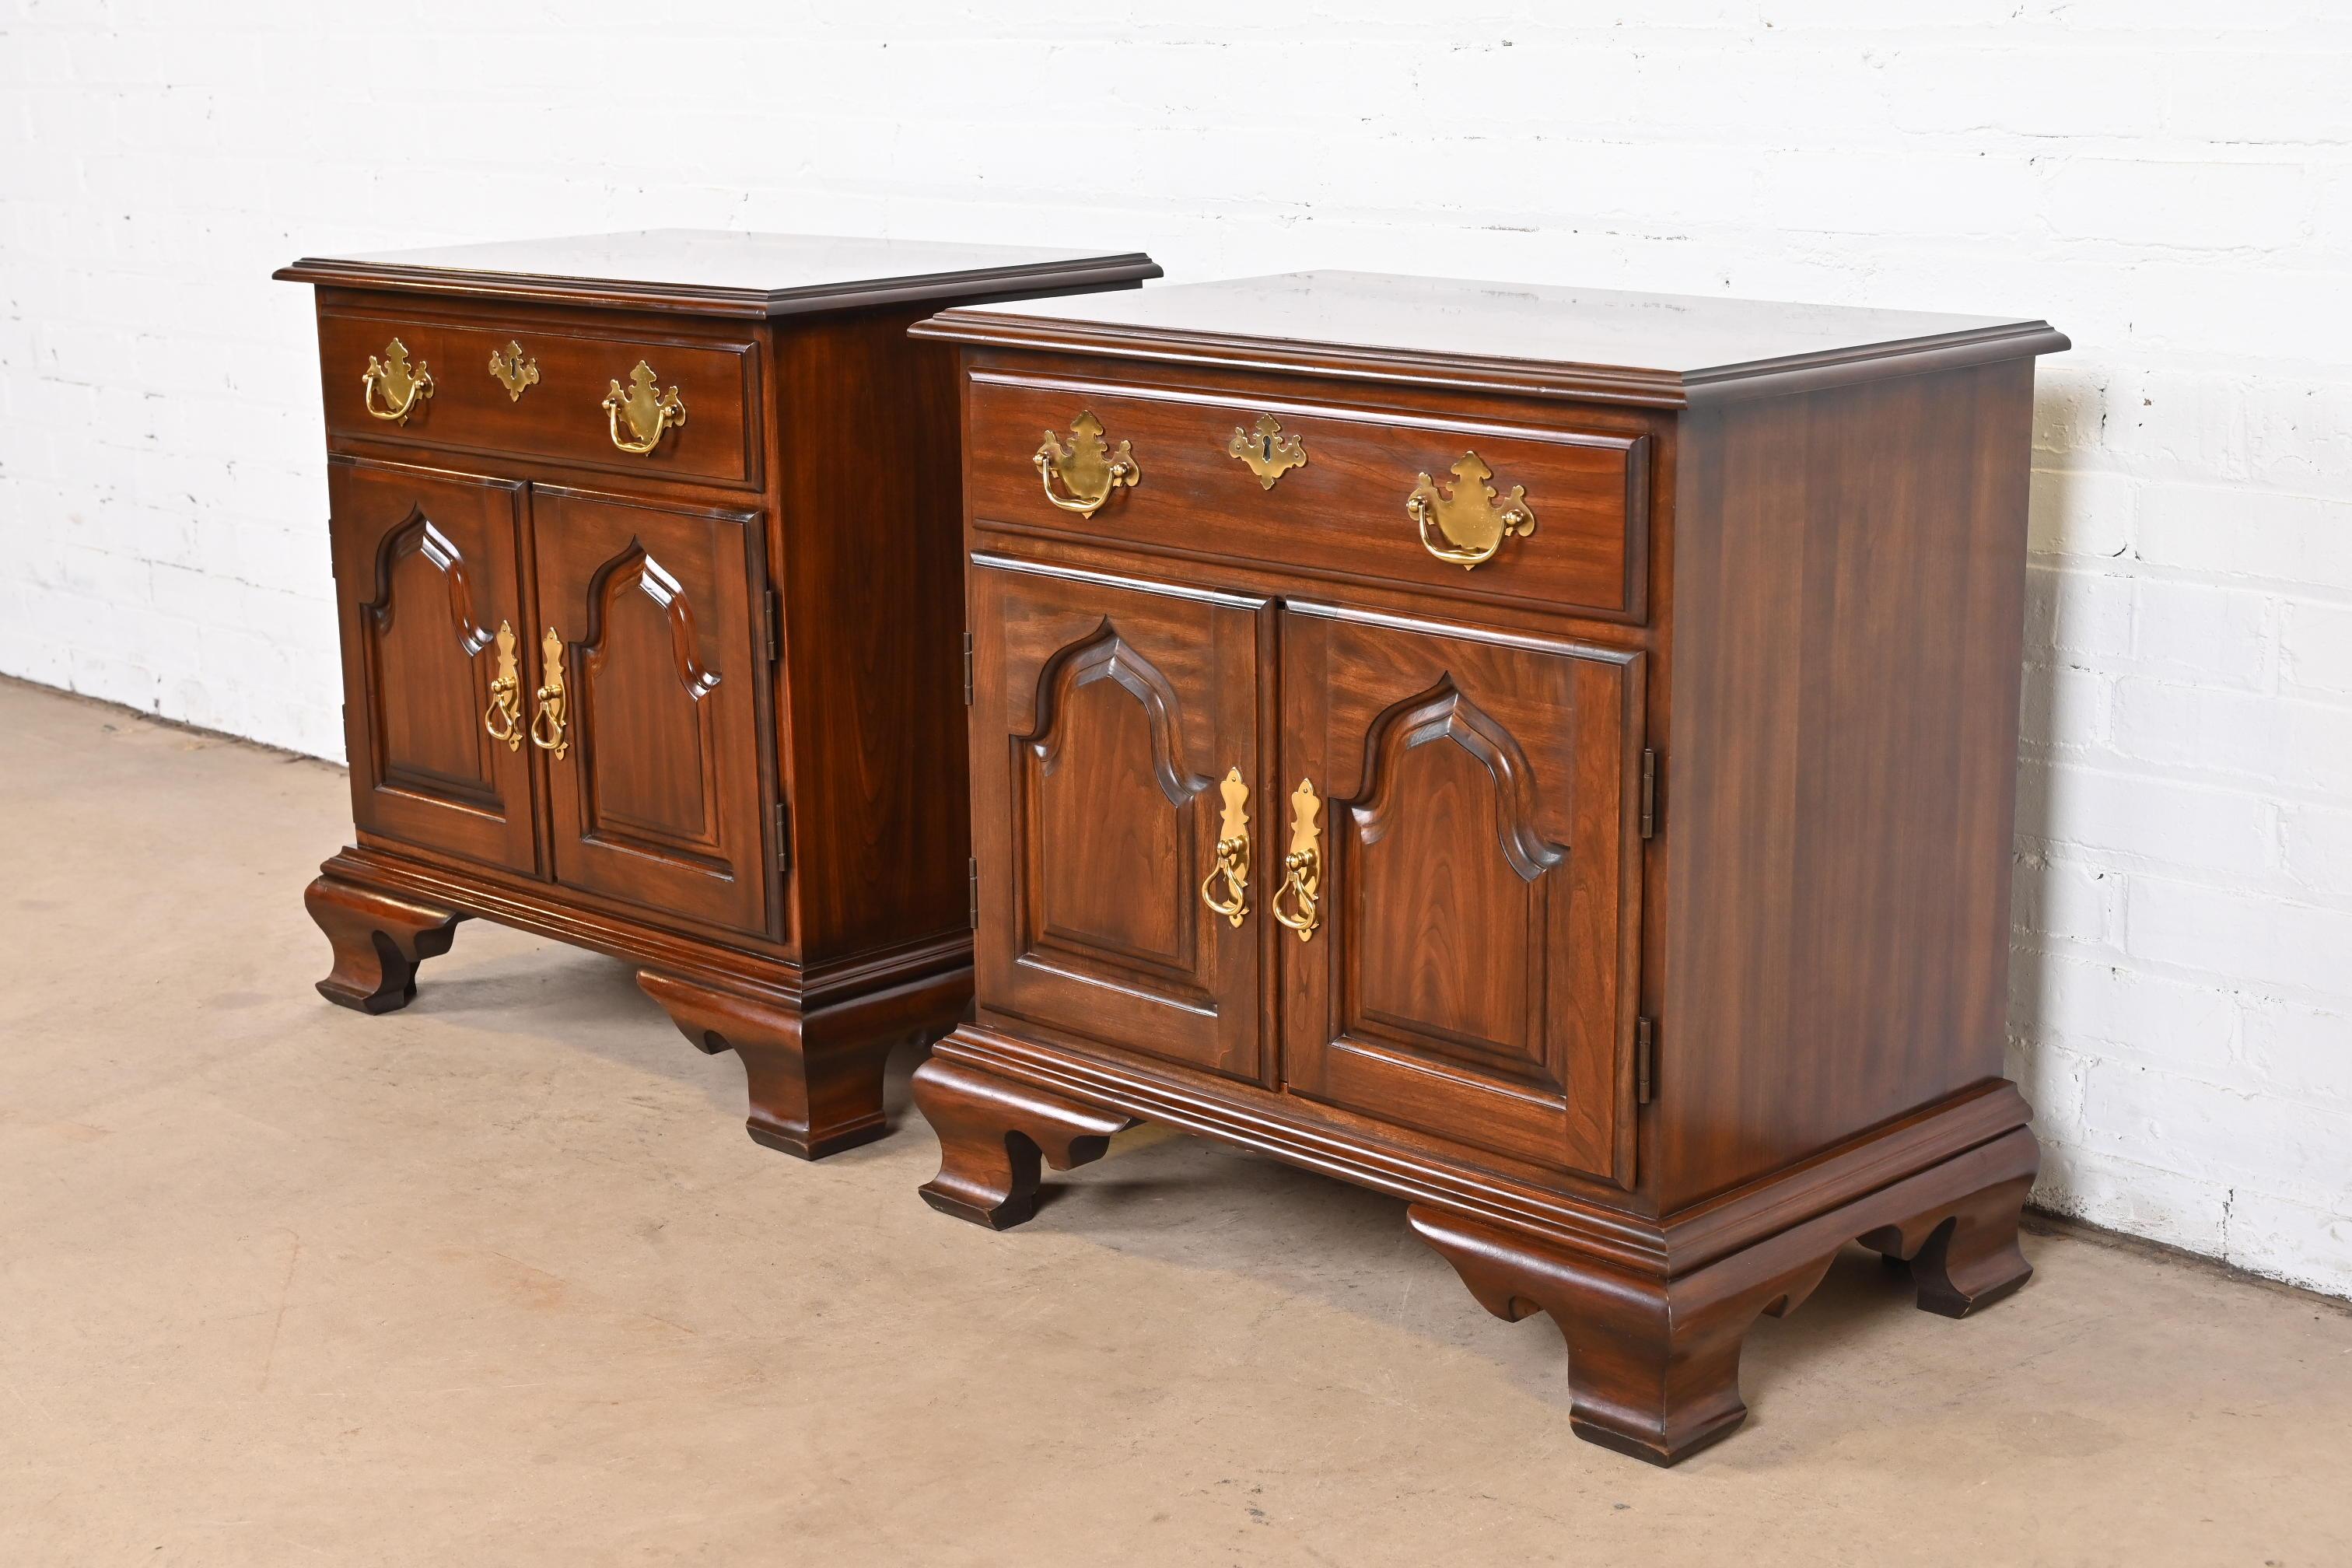 Harden Furniture Georgian Solid Cherry Wood Nightstands, Pair In Good Condition For Sale In South Bend, IN